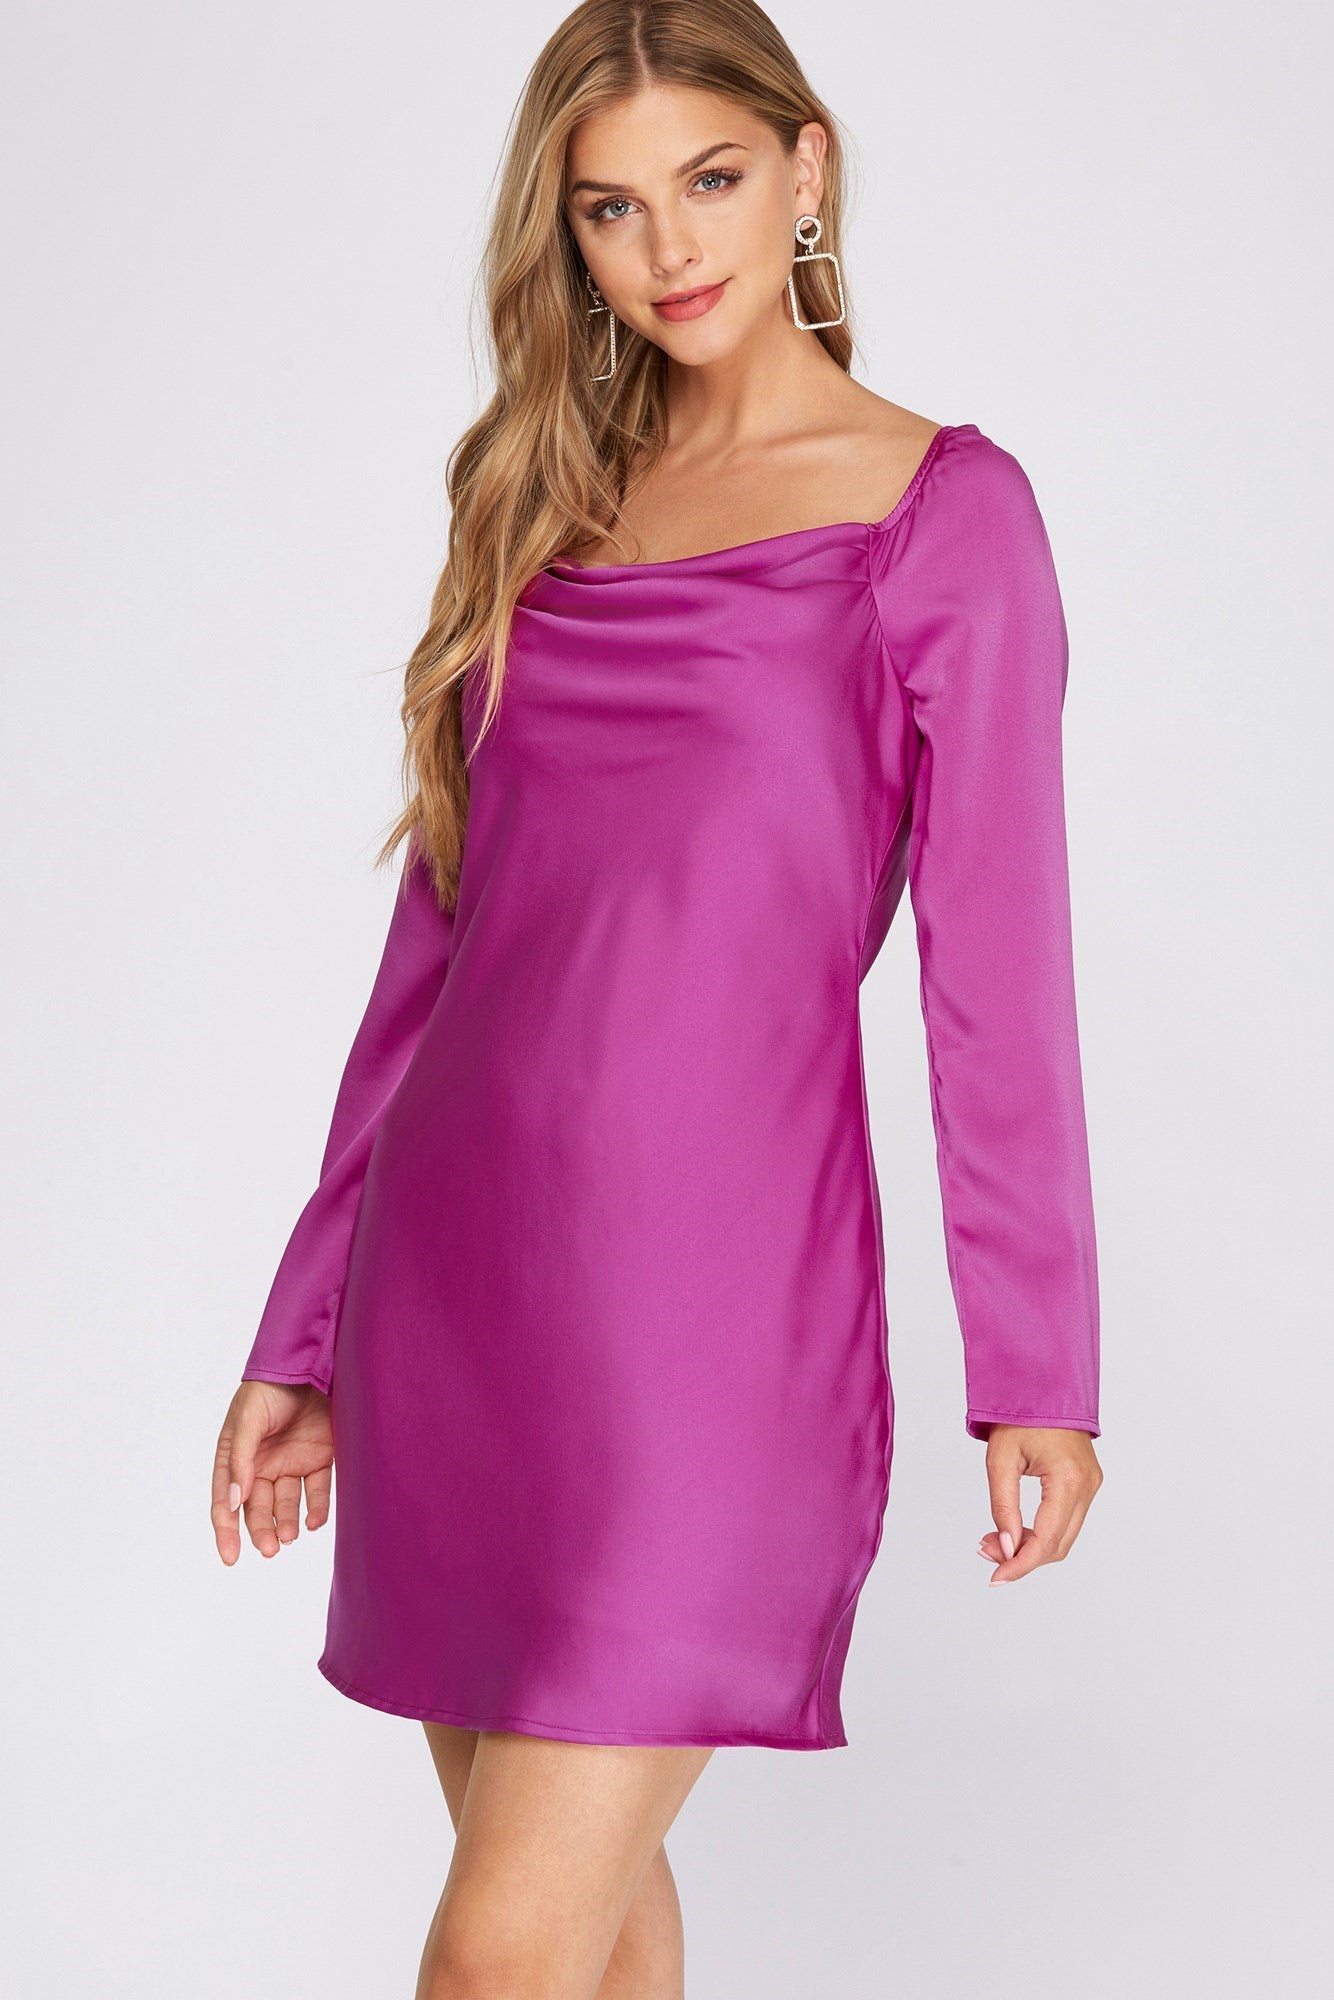 Purple mini dress with long sleeves, cowl neck, and tie back detail